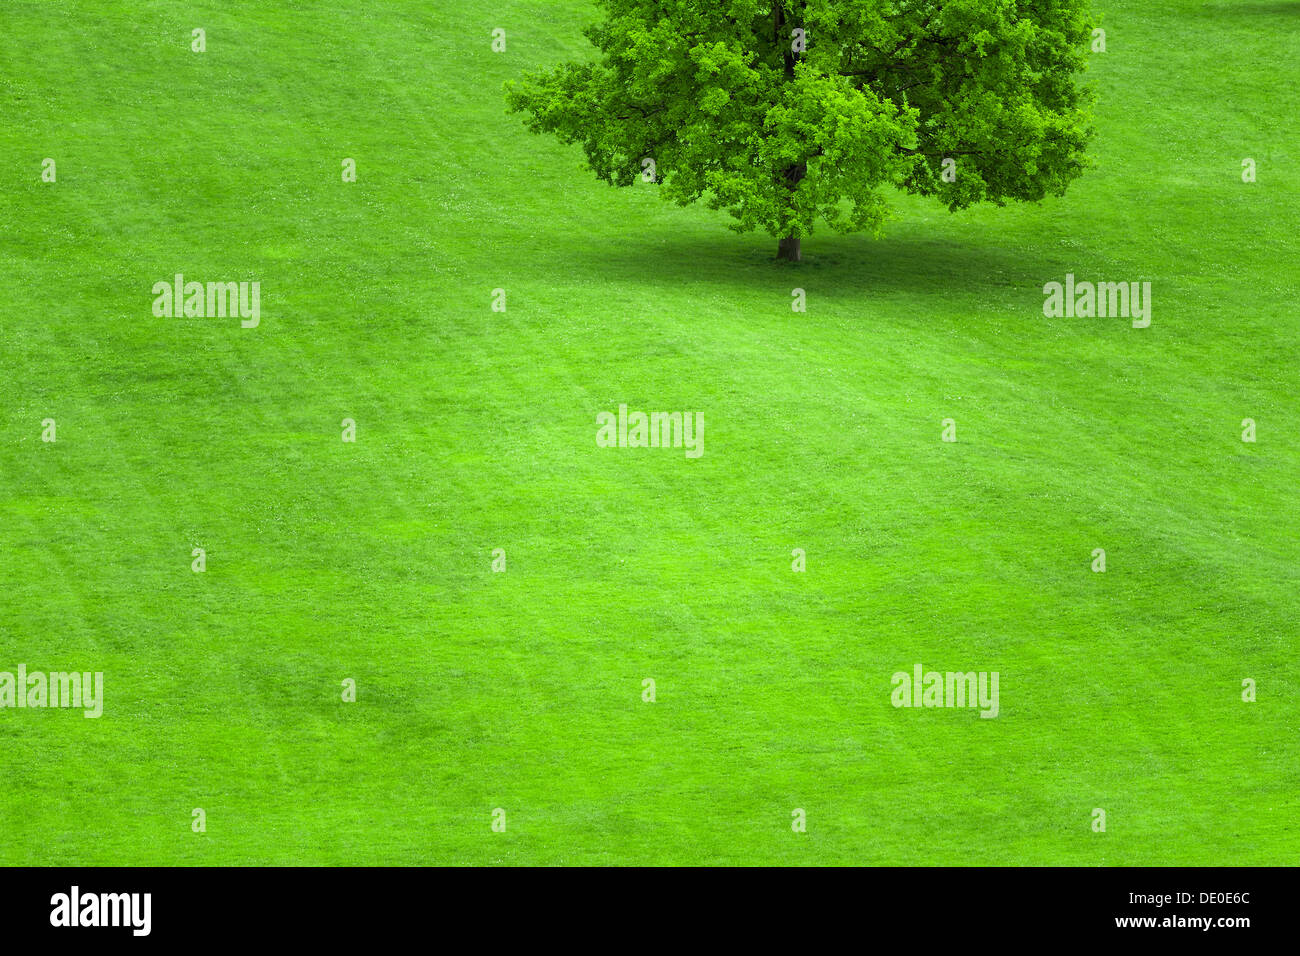 Single tree on a green grass lawn Stock Photo